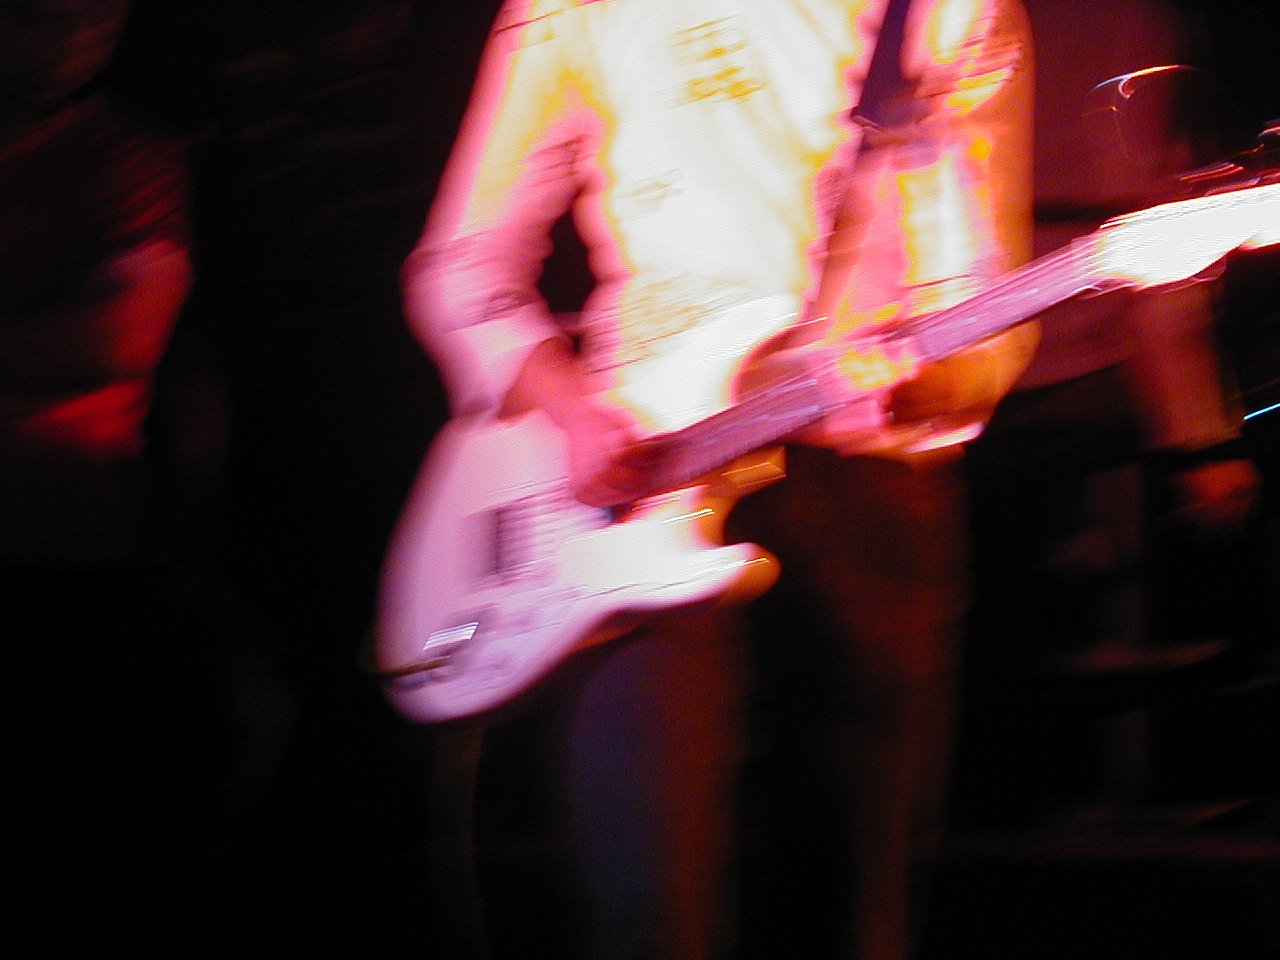 a blurred po shows a person with a guitar